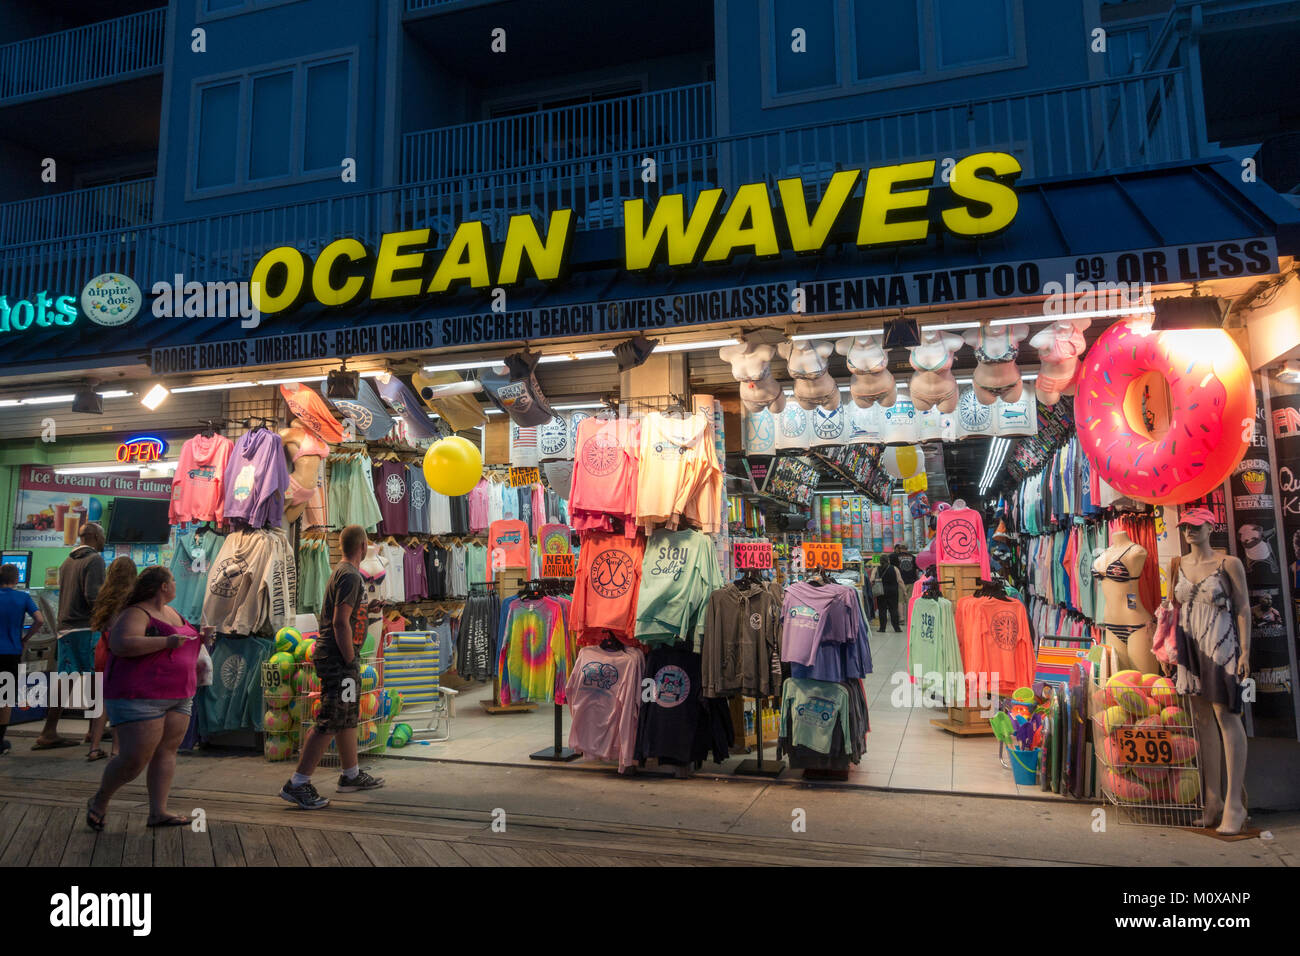 The Ocean Waves beach clothing and souvenir store on the Boardwalk in Ocean  City, Maryland, United States Stock Photo - Alamy